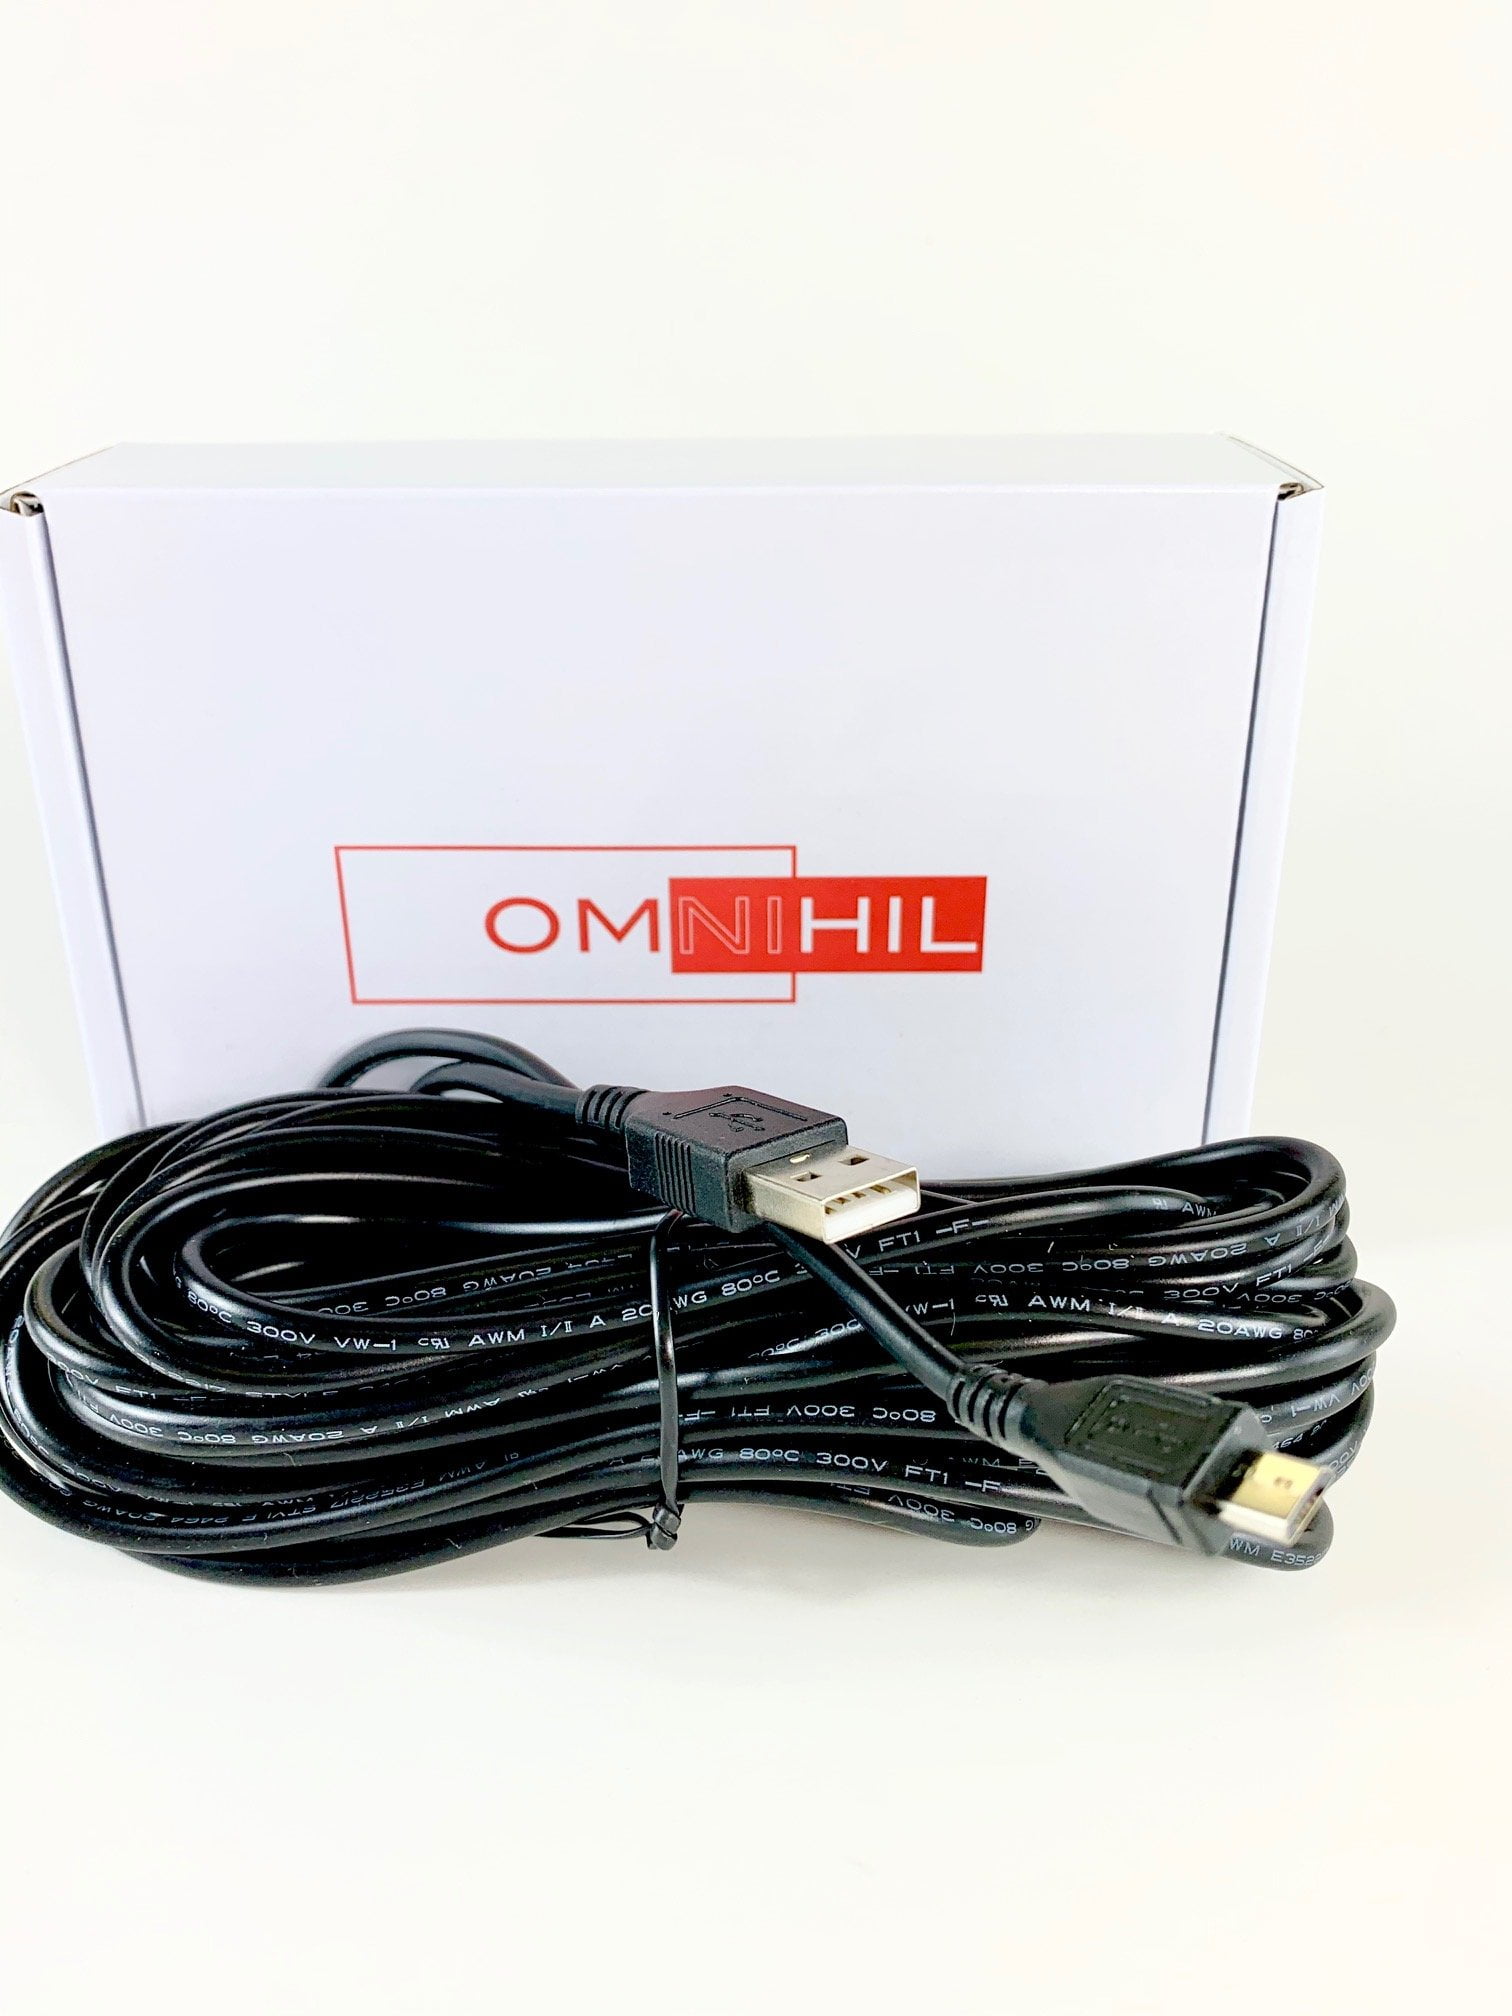 OMNIHIL 15 Feet Long High Speed USB 2.0 Cable Compatible with Verizon MHS815L Ellipsis Jetpack 